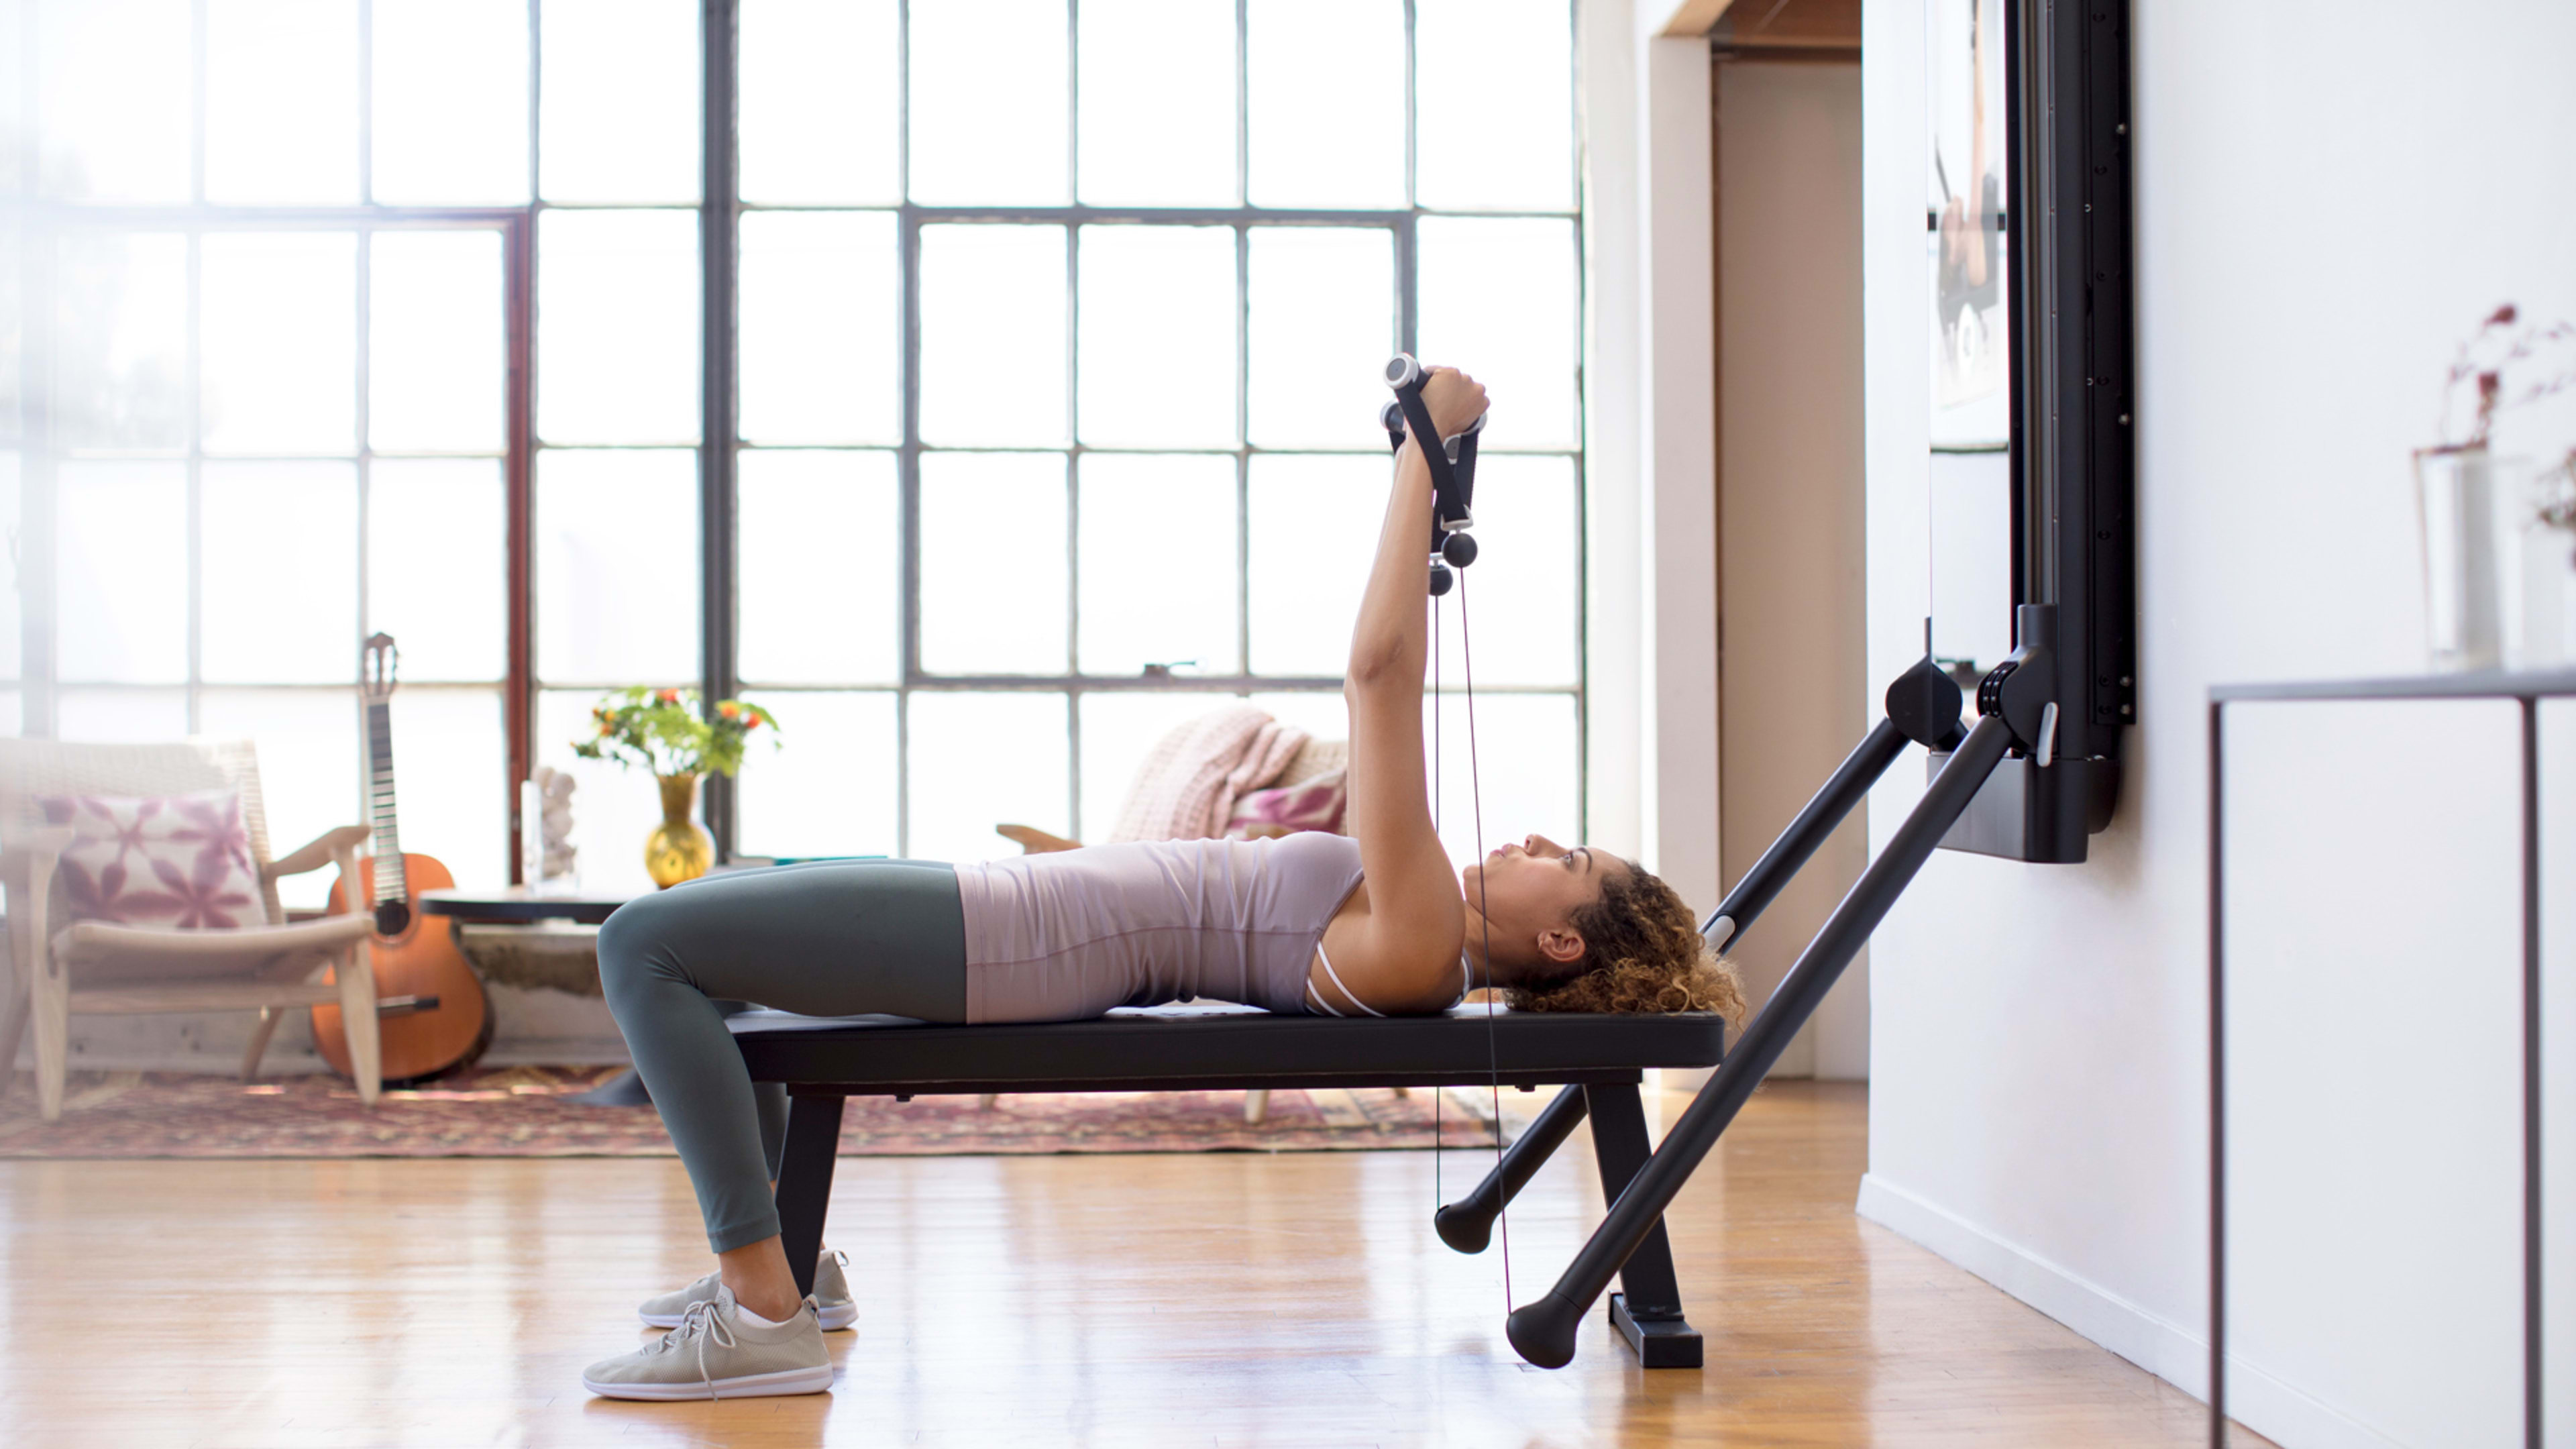 This $2,995 home gym is like Peloton for weight-lifting